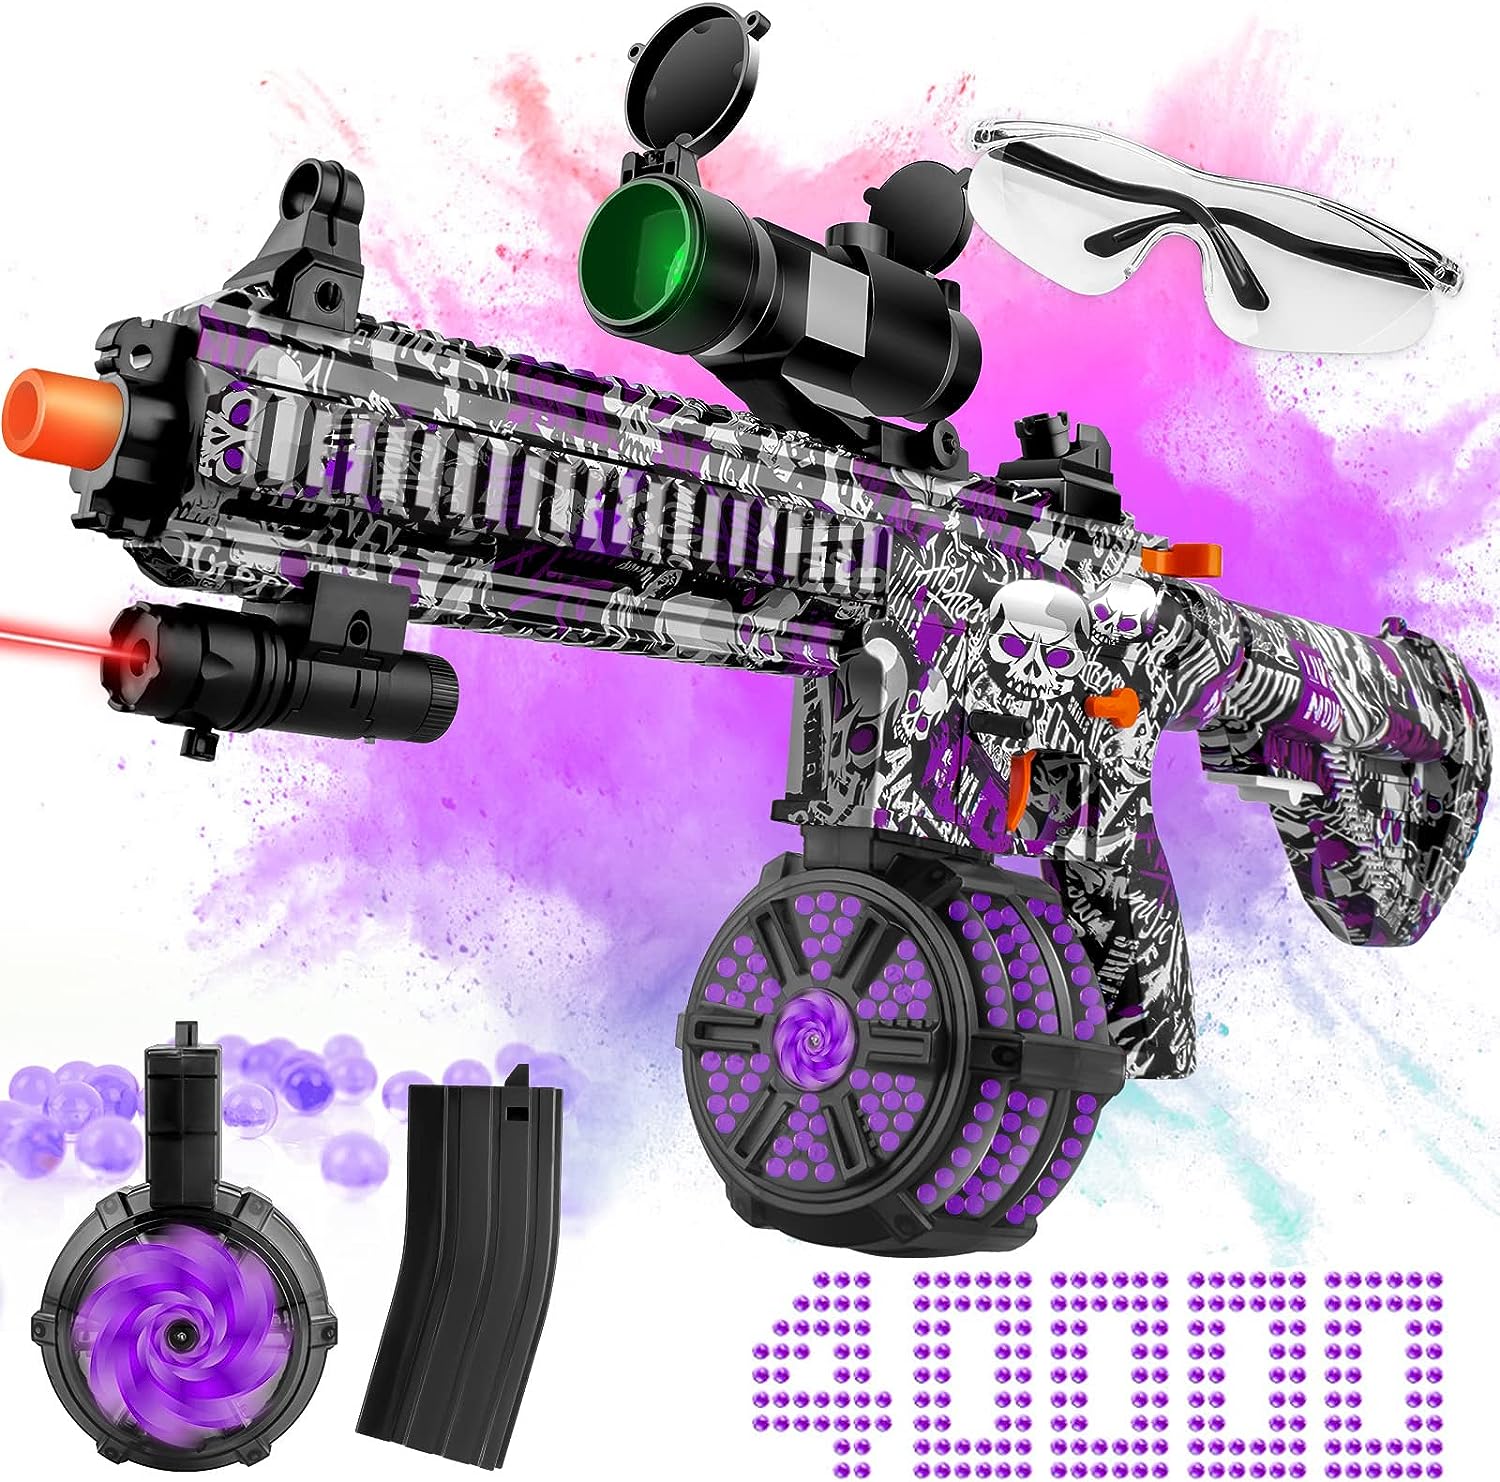 purple orbeez gun with a scope and other accessories.